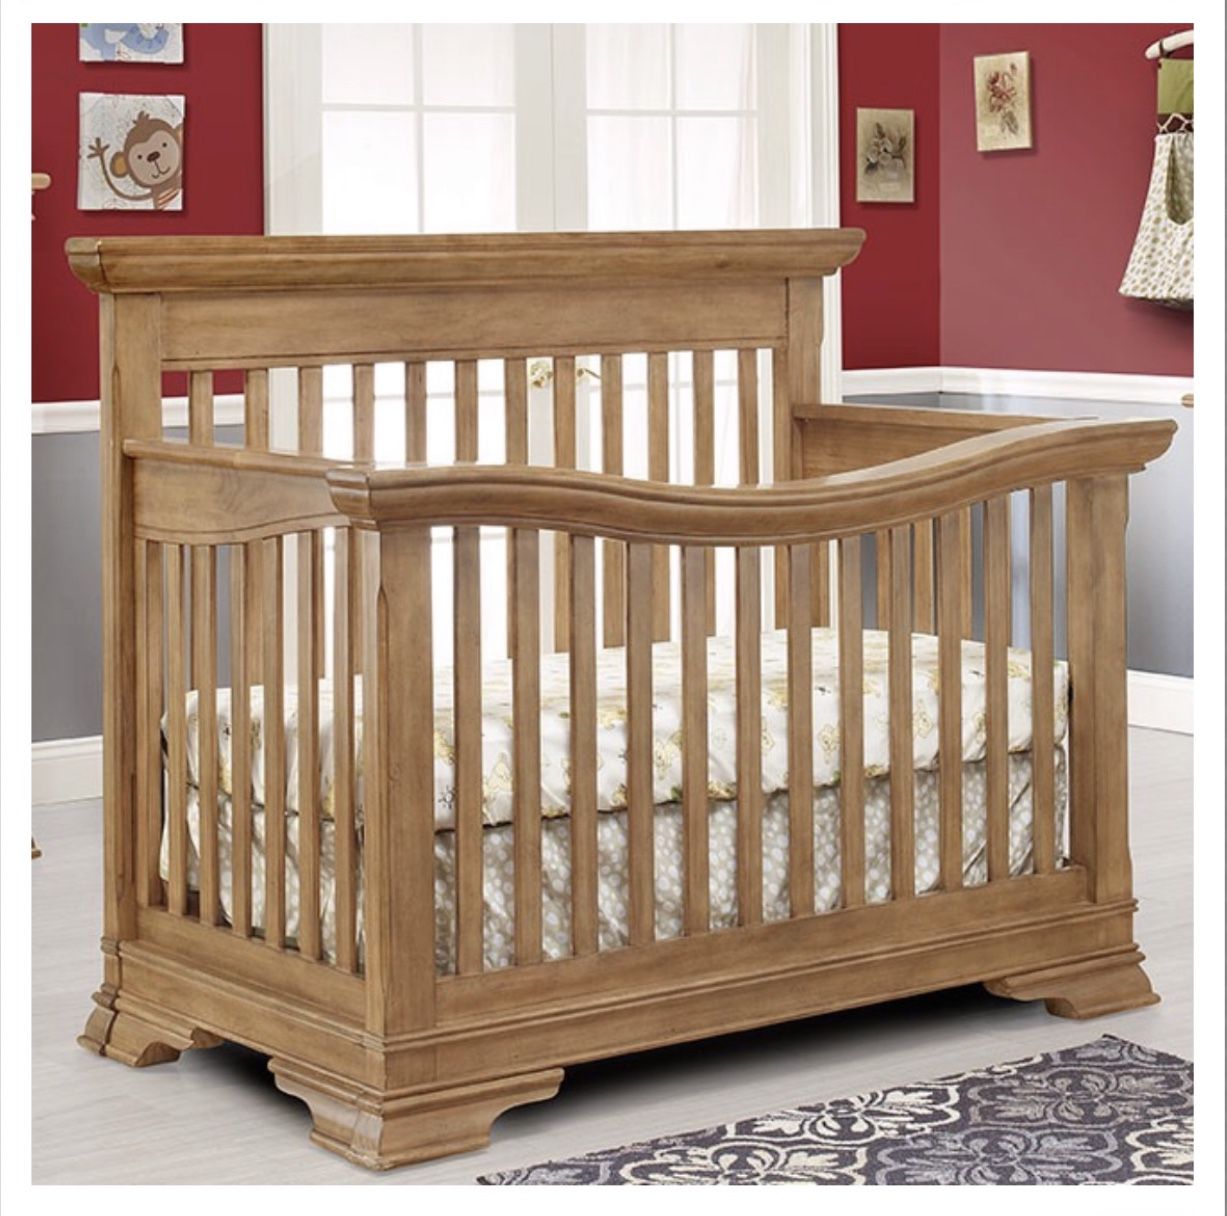 Lusso Nursery Collection Crib W/ Mini Rail In Front